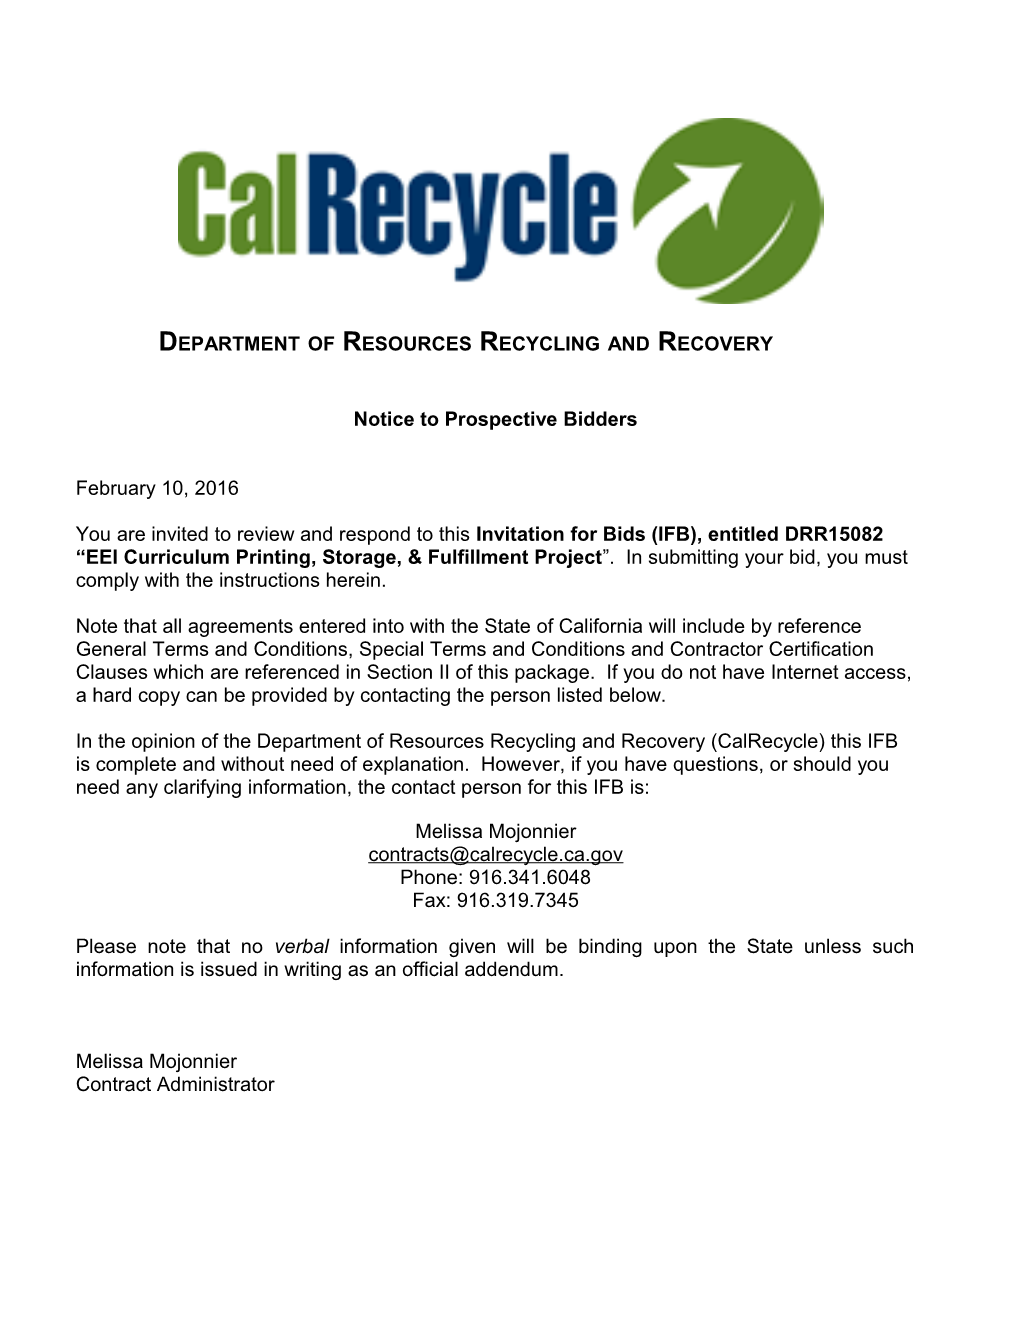 Department of Resources Recycling and Recovery s2